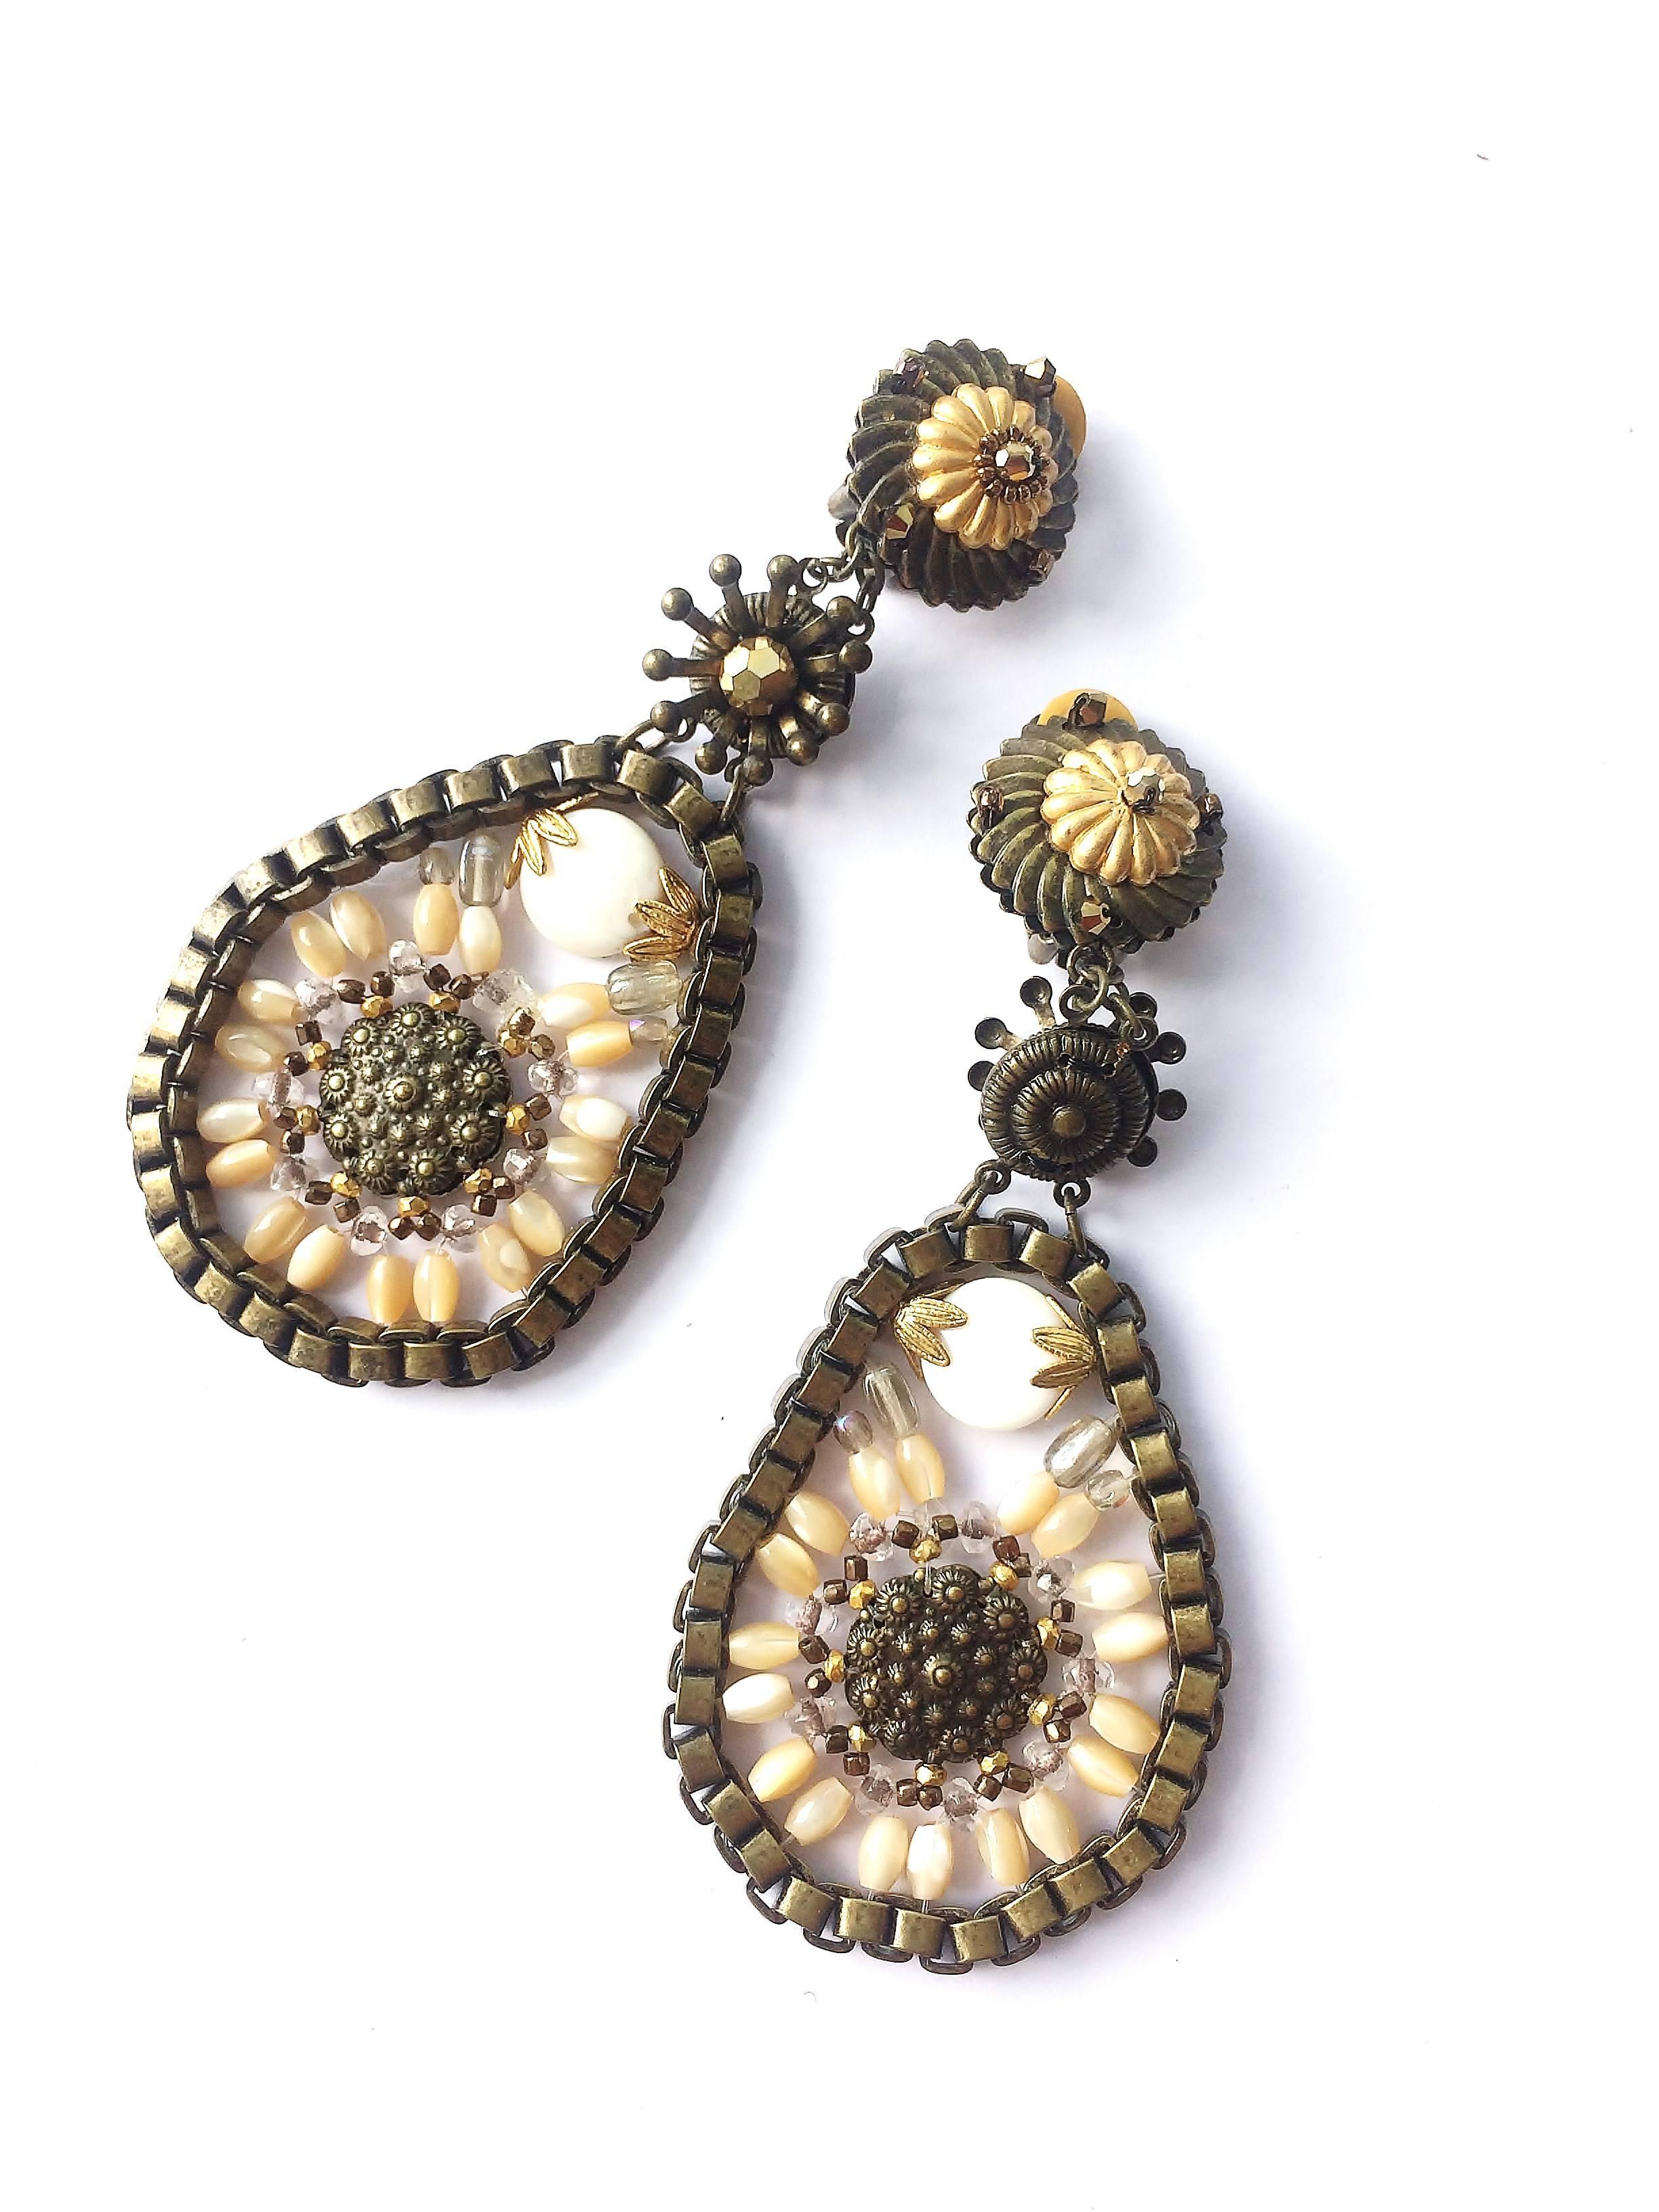 Dynamic and funky drop earrings from the 1990s by Miriam Haskell,in a soft gilded metal, with white and clear glass beads, and imitation pearls. A somewhat more modern and contemporary look from this designer, these earrings have a great appeal for